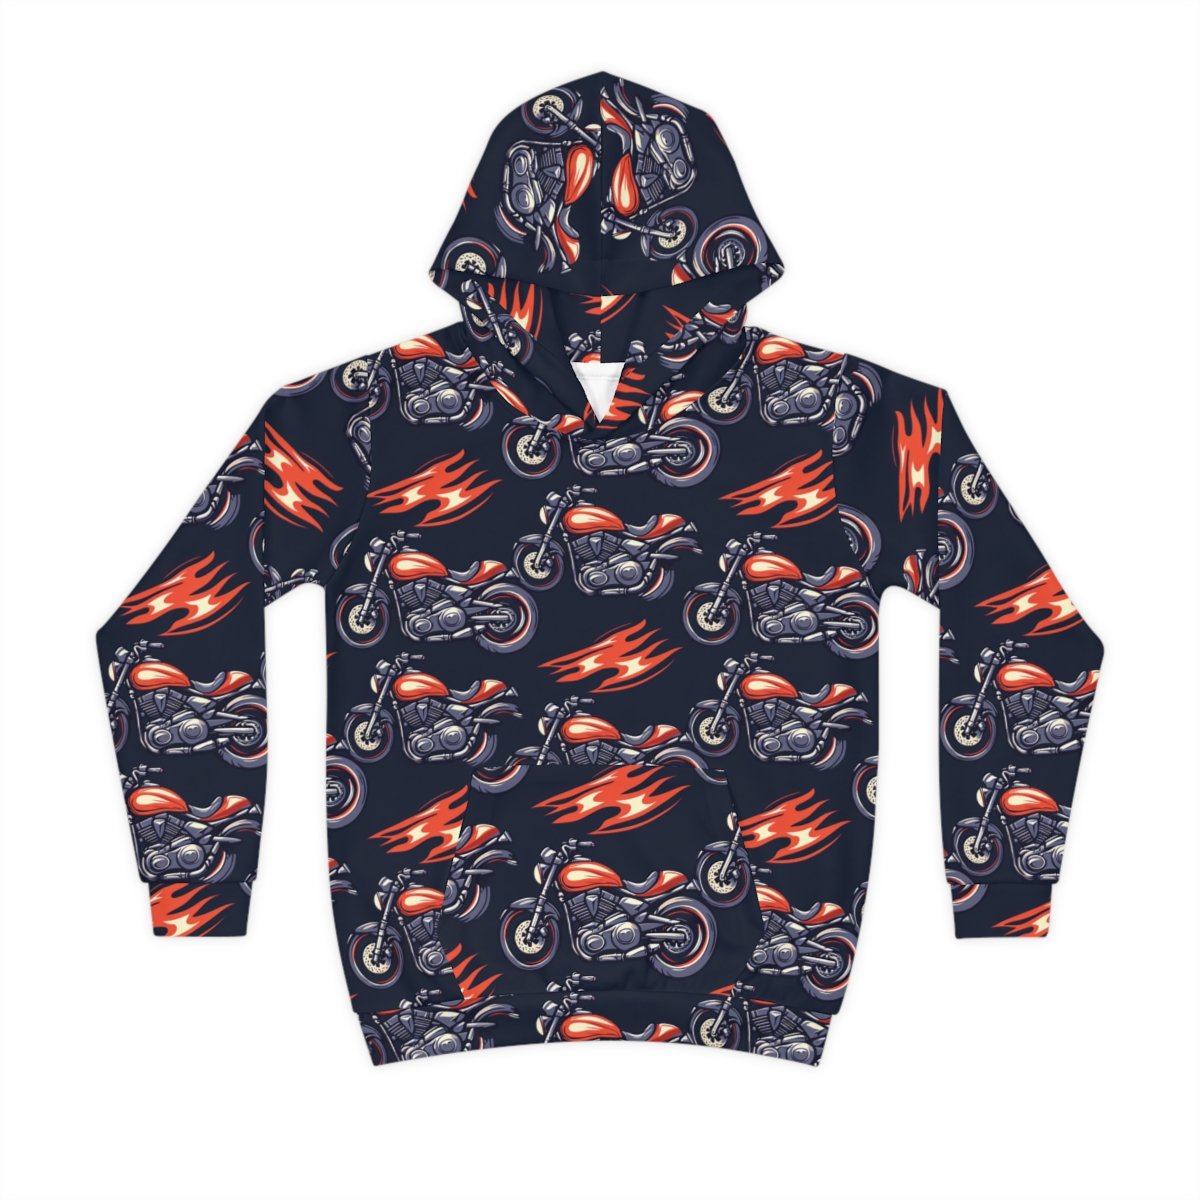 Motorcycle and Flames - Red White on Black - Children's Hoodie (AOP)